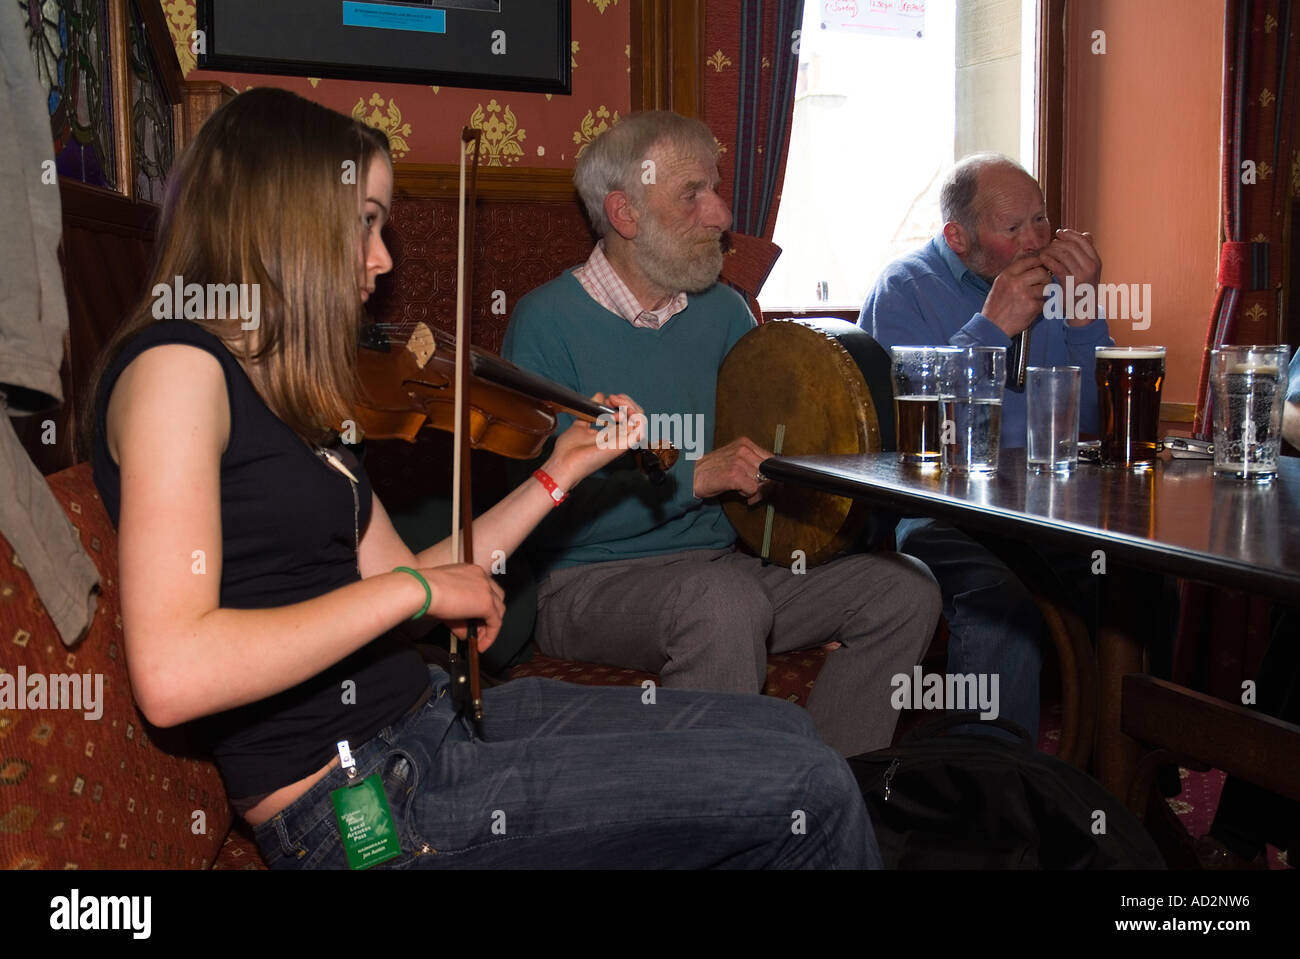 dh Orkney Folk Festival STROMNESS ORKNEY musicians playing fiddle bodhran drum stromness hotel pub music player scotland woman Stock Photo